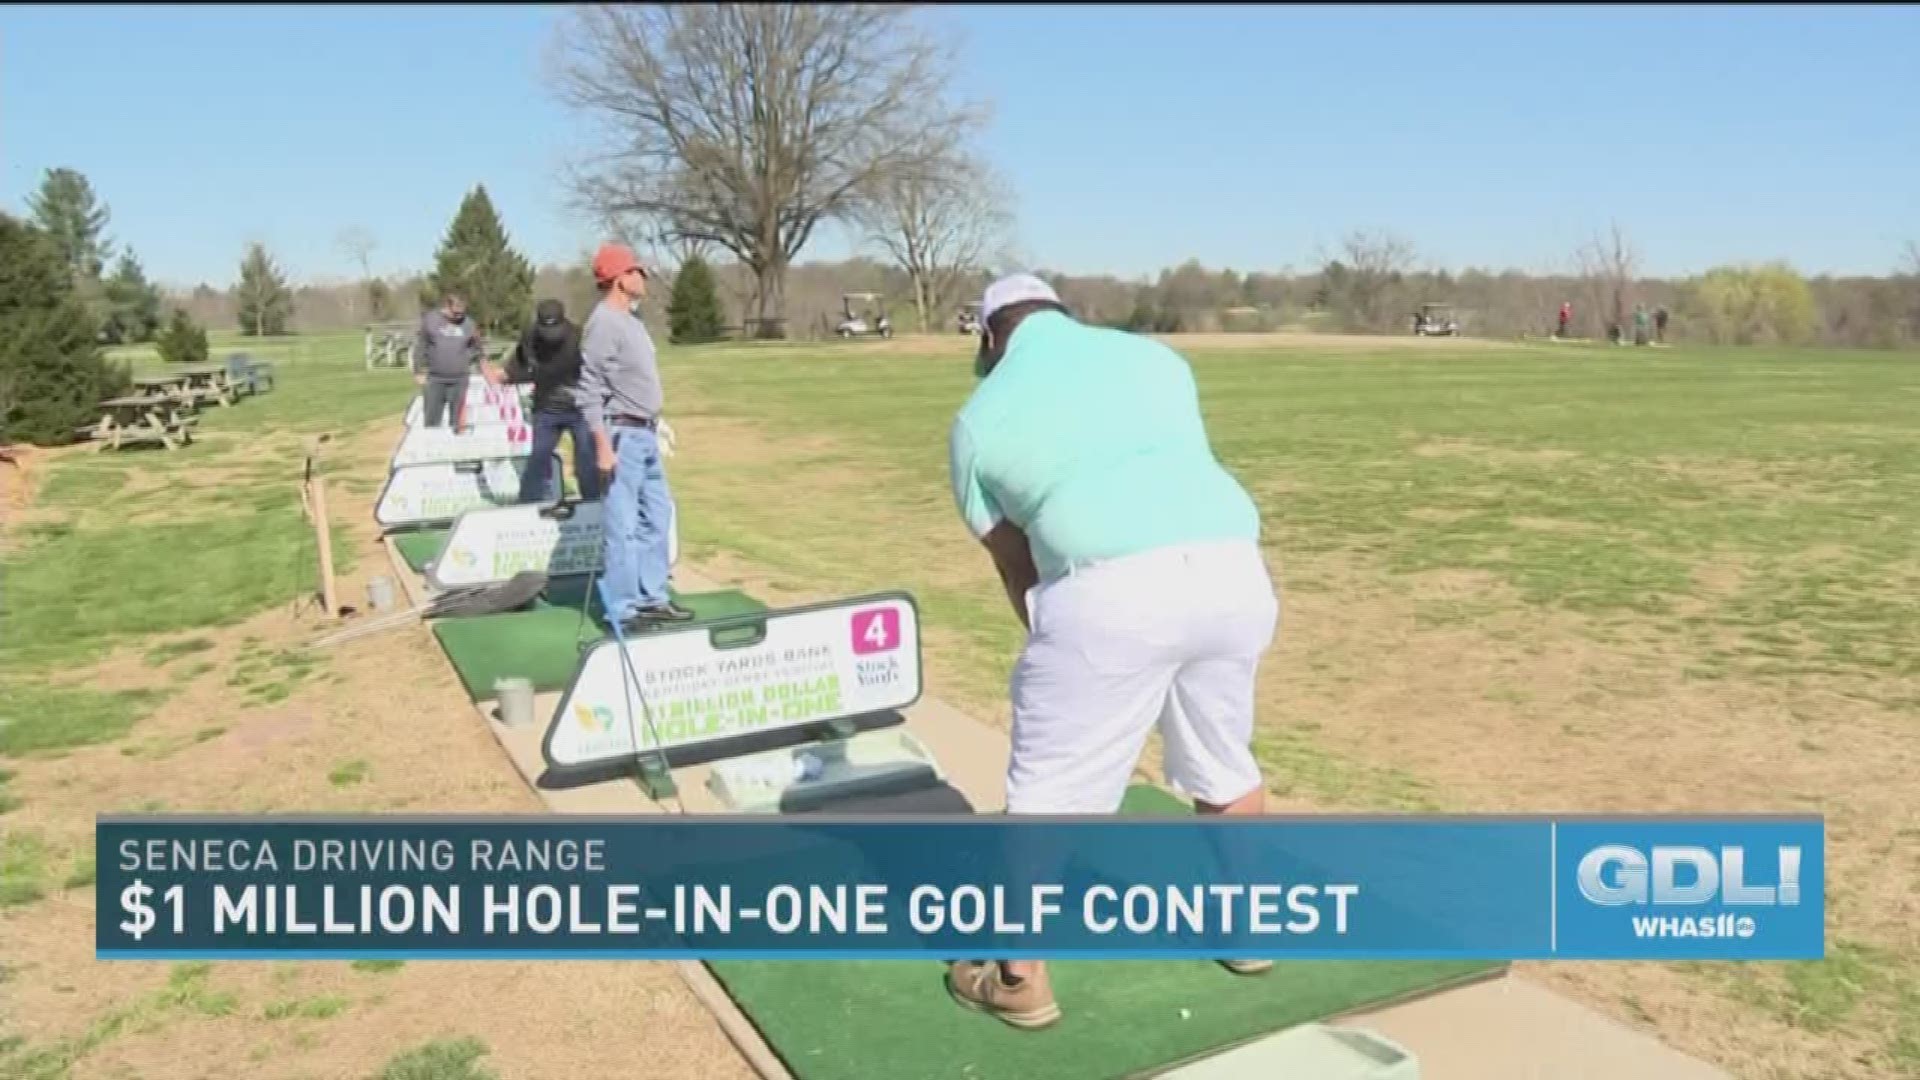 The hole-in-one contest, held at the eighth hole of the Seneca Golf Course, is an annual part of Derby festivities.